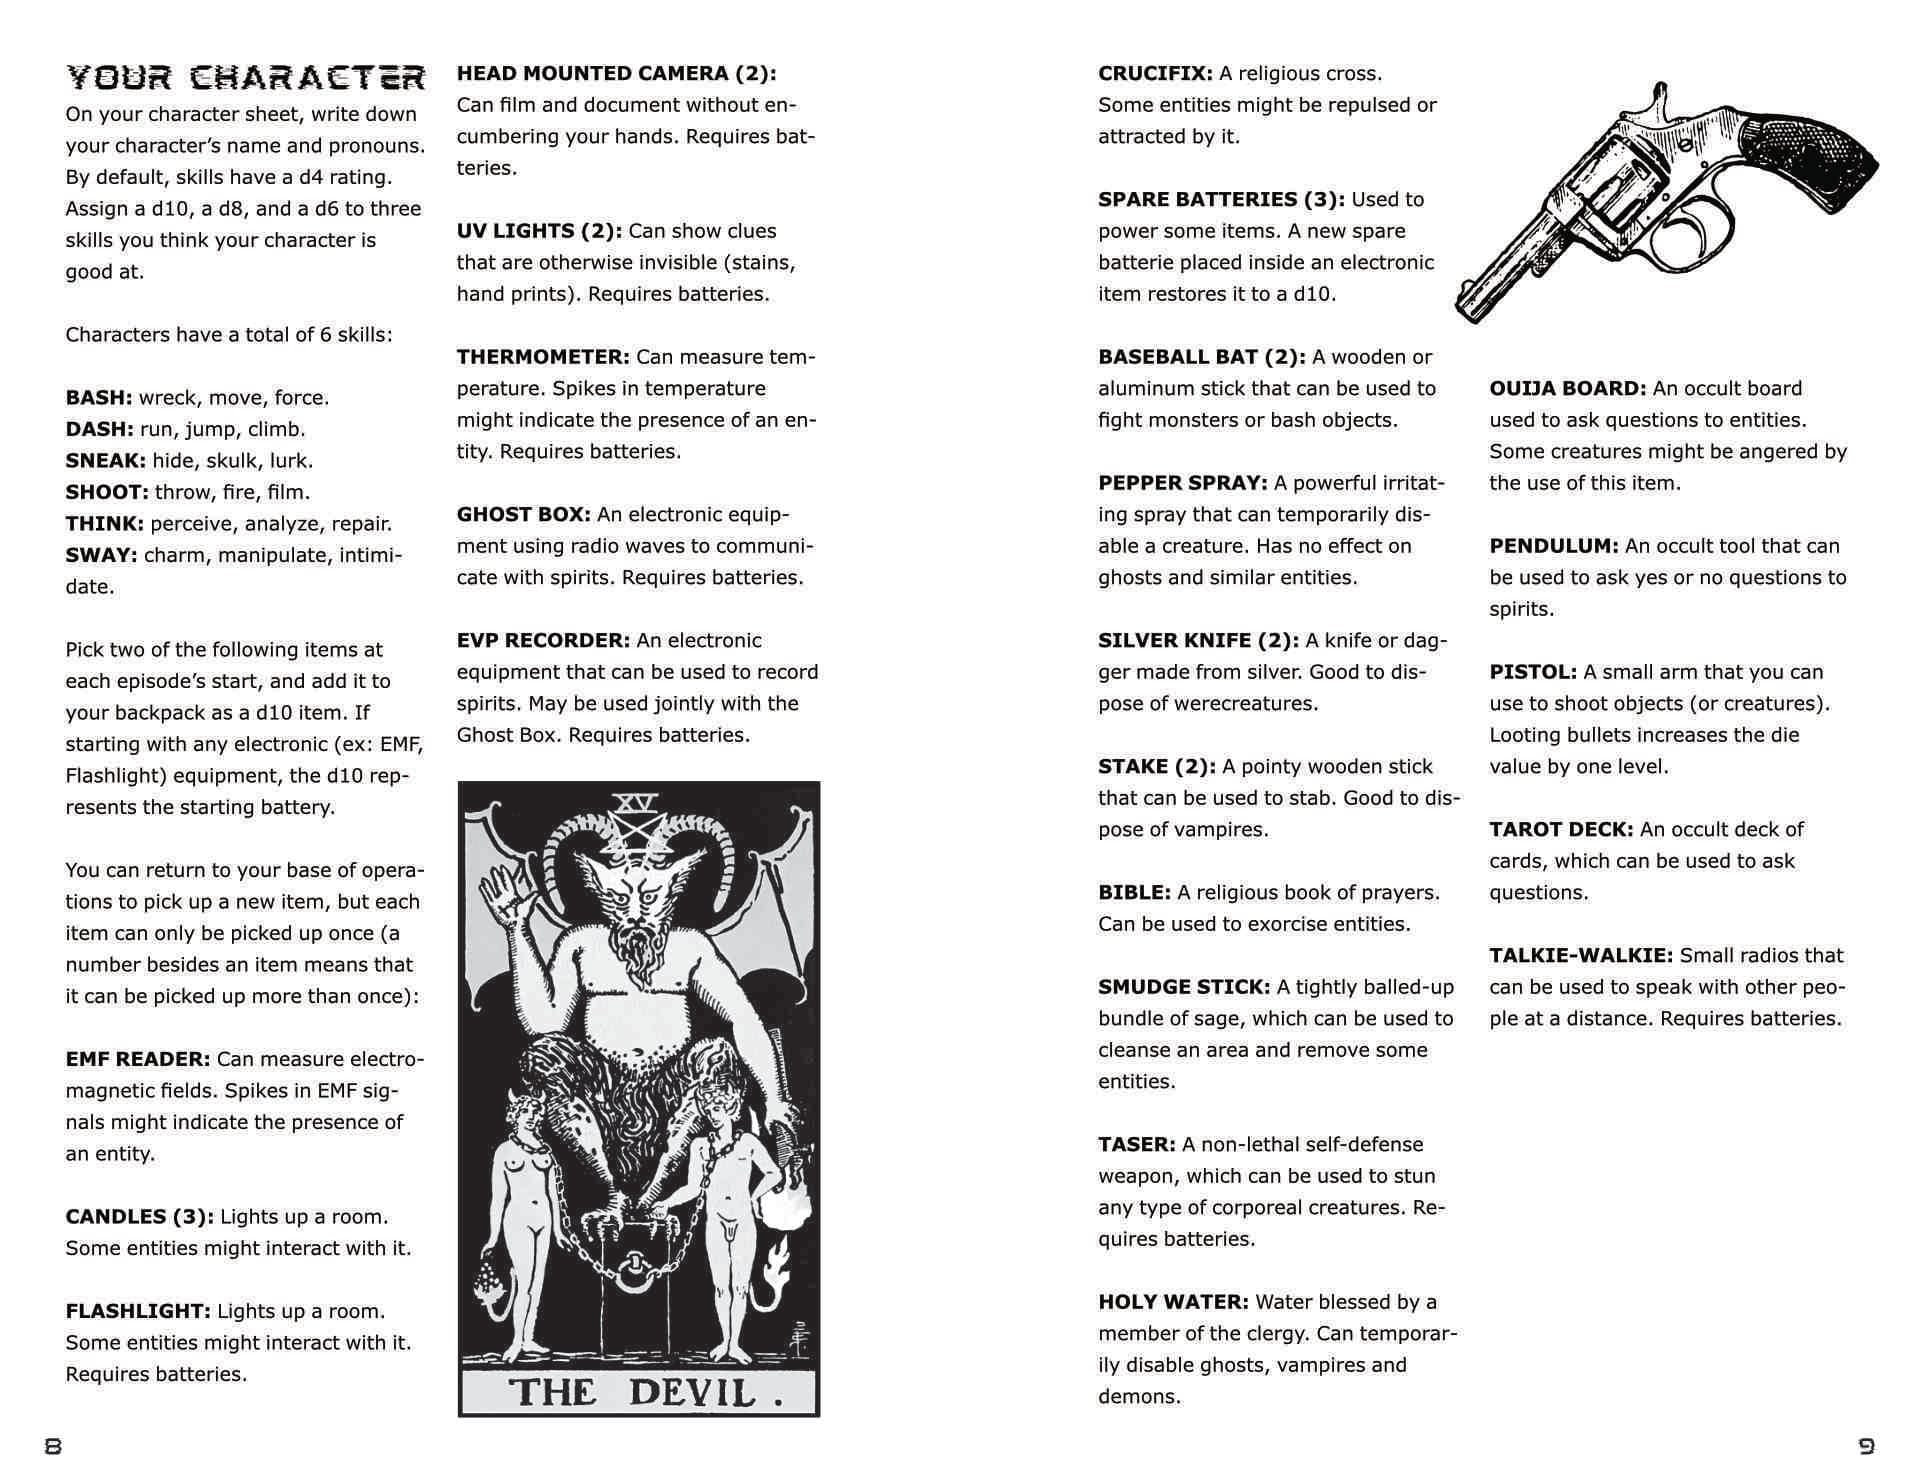 A page example showing the different items and actions your character can do. It has a black and white image of The Devil tarot card and a pistol.